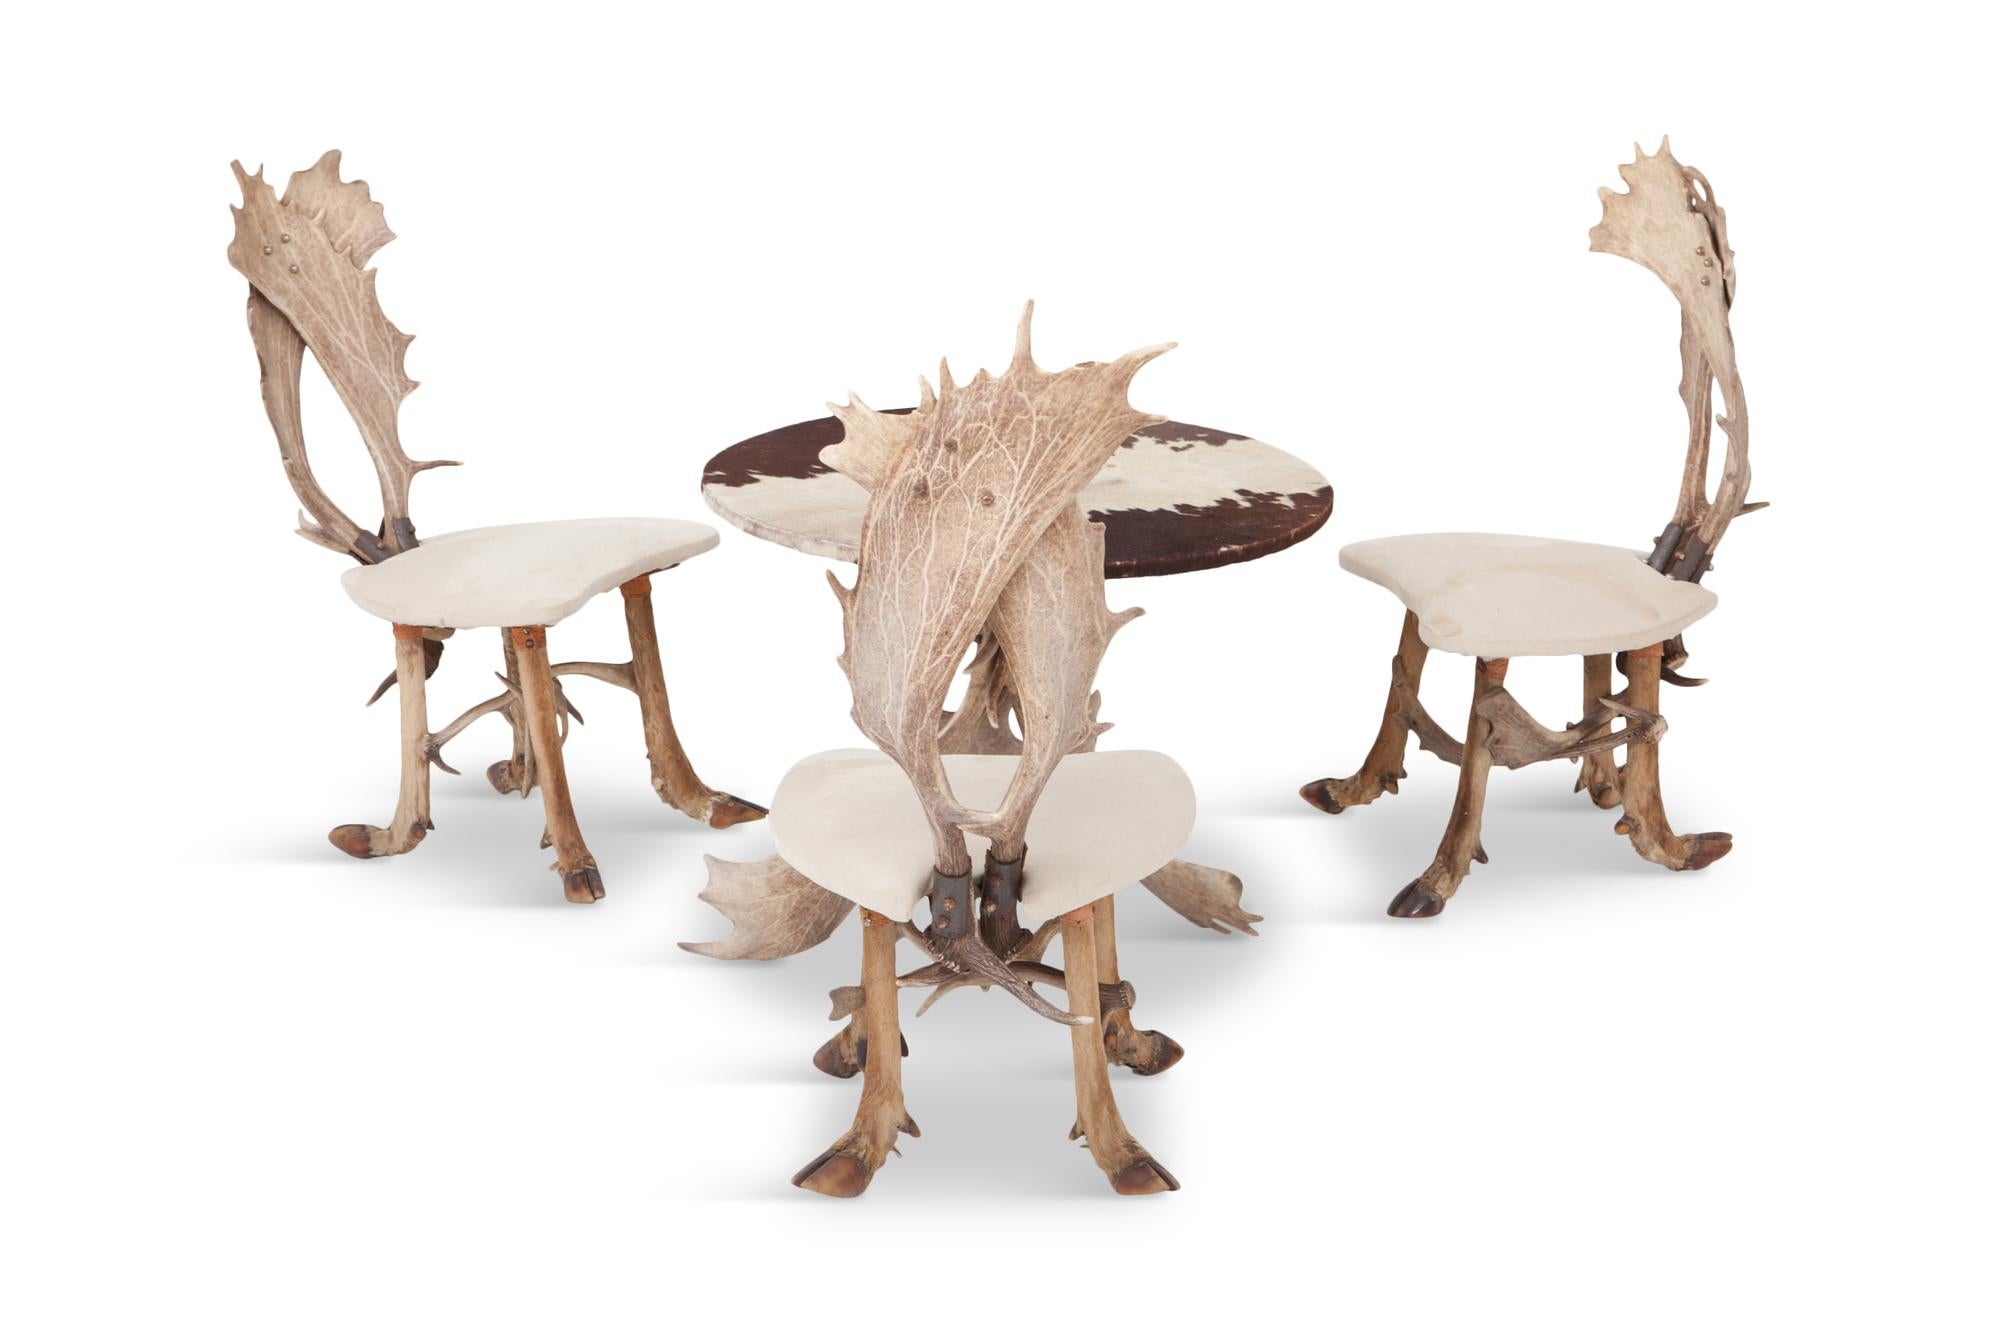 Mid-century Hunting chairs and matching centre table. The back of the chairs are made of two deer antlers while the legs are constructed out of deer hooves. The seats are upholstered in a light neutral velvet upholstery. The matching round centre